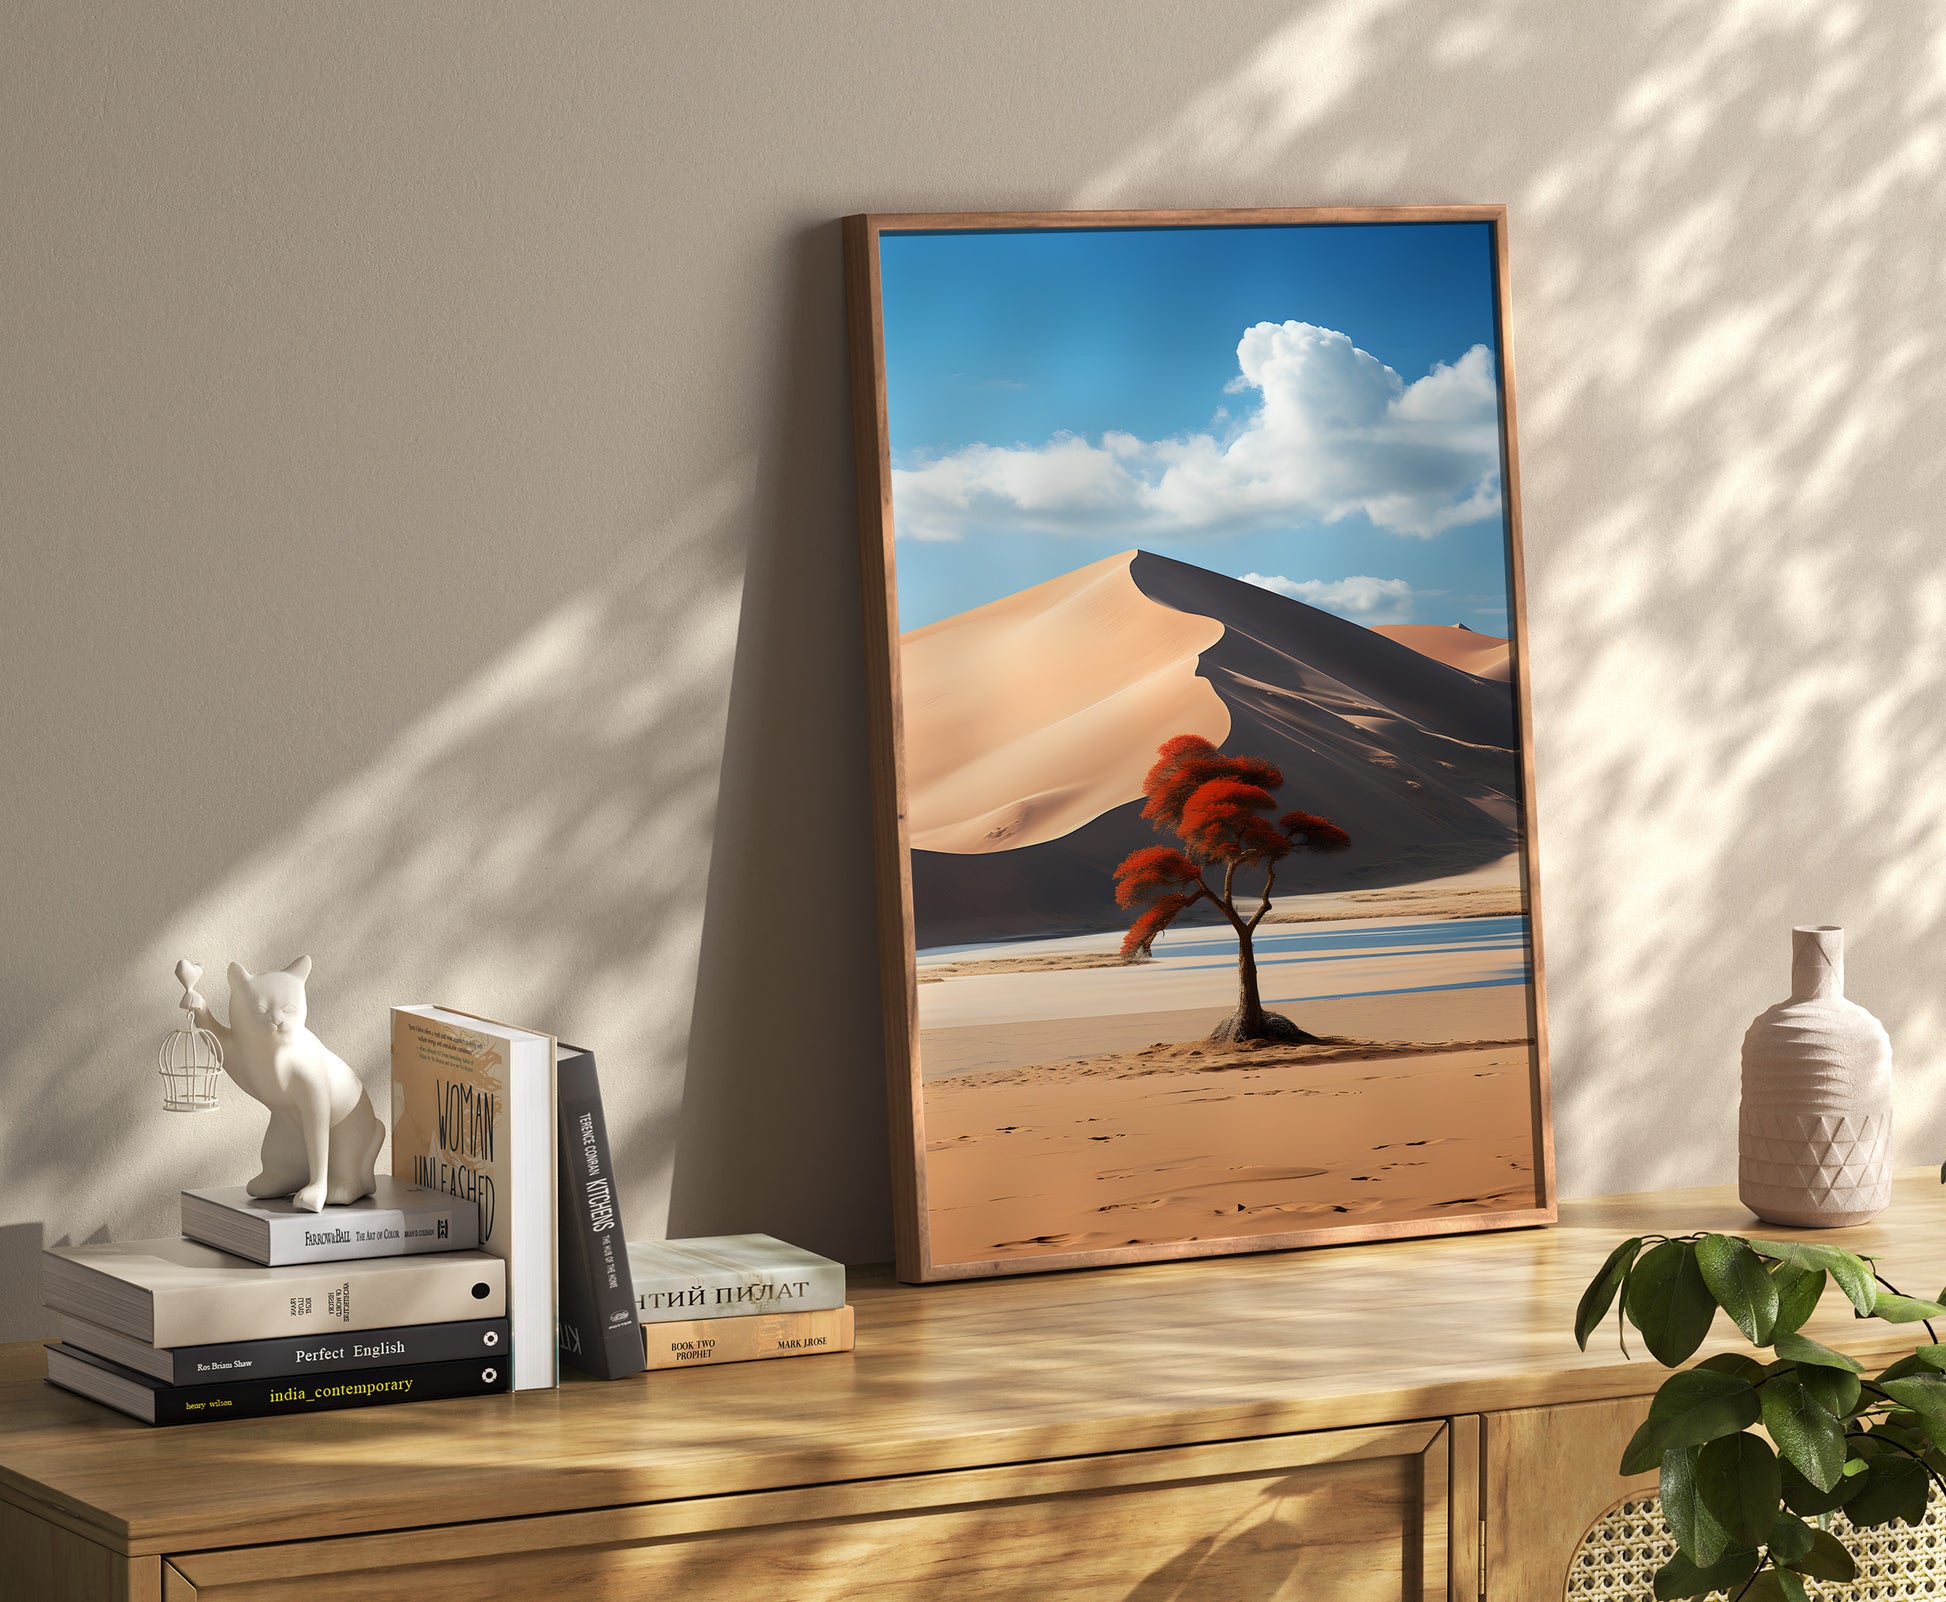 Framed desert landscape poster on a wooden floor leaning against a wall with decorative items.